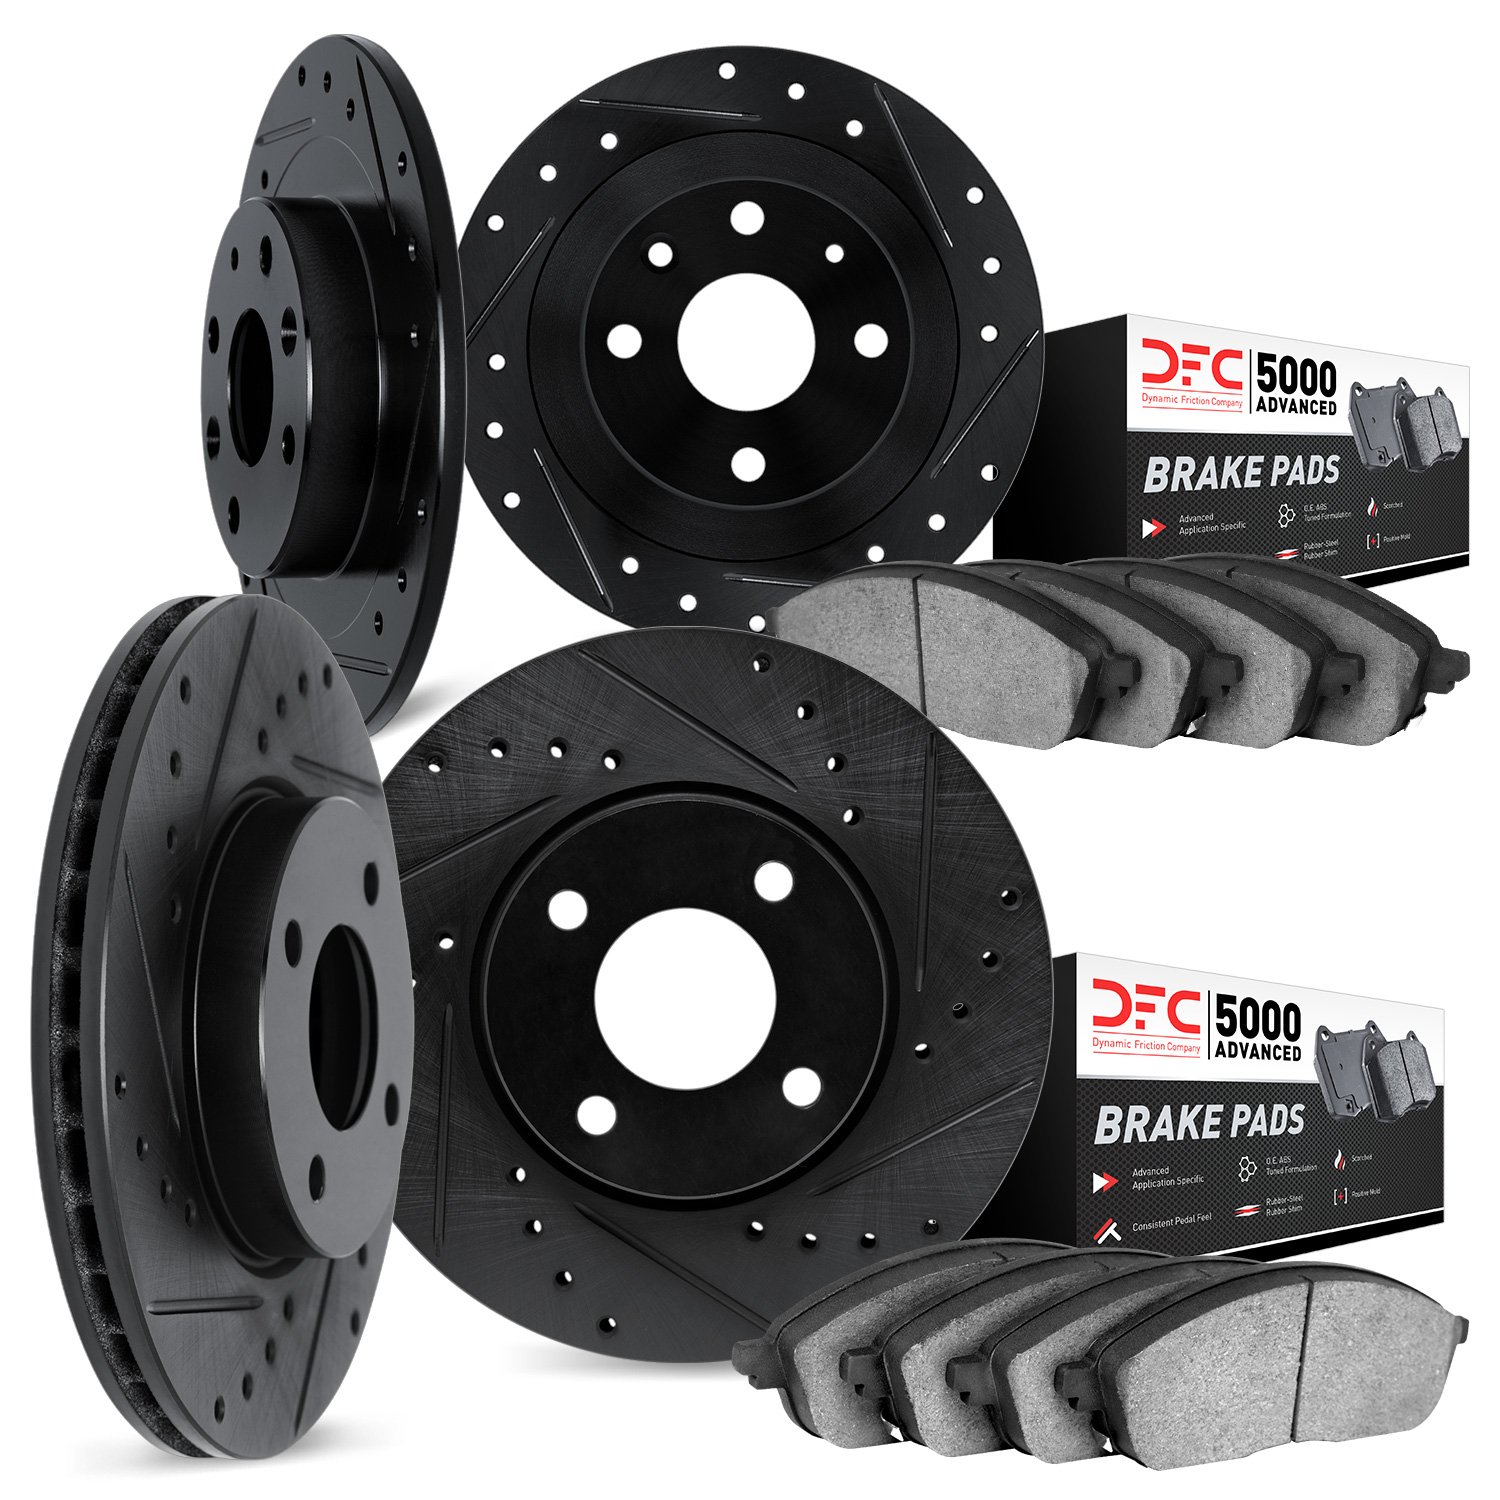 8504-67091 Drilled/Slotted Brake Rotors w/5000 Advanced Brake Pads Kit [Black], 2000-2006 Infiniti/Nissan, Position: Front and R